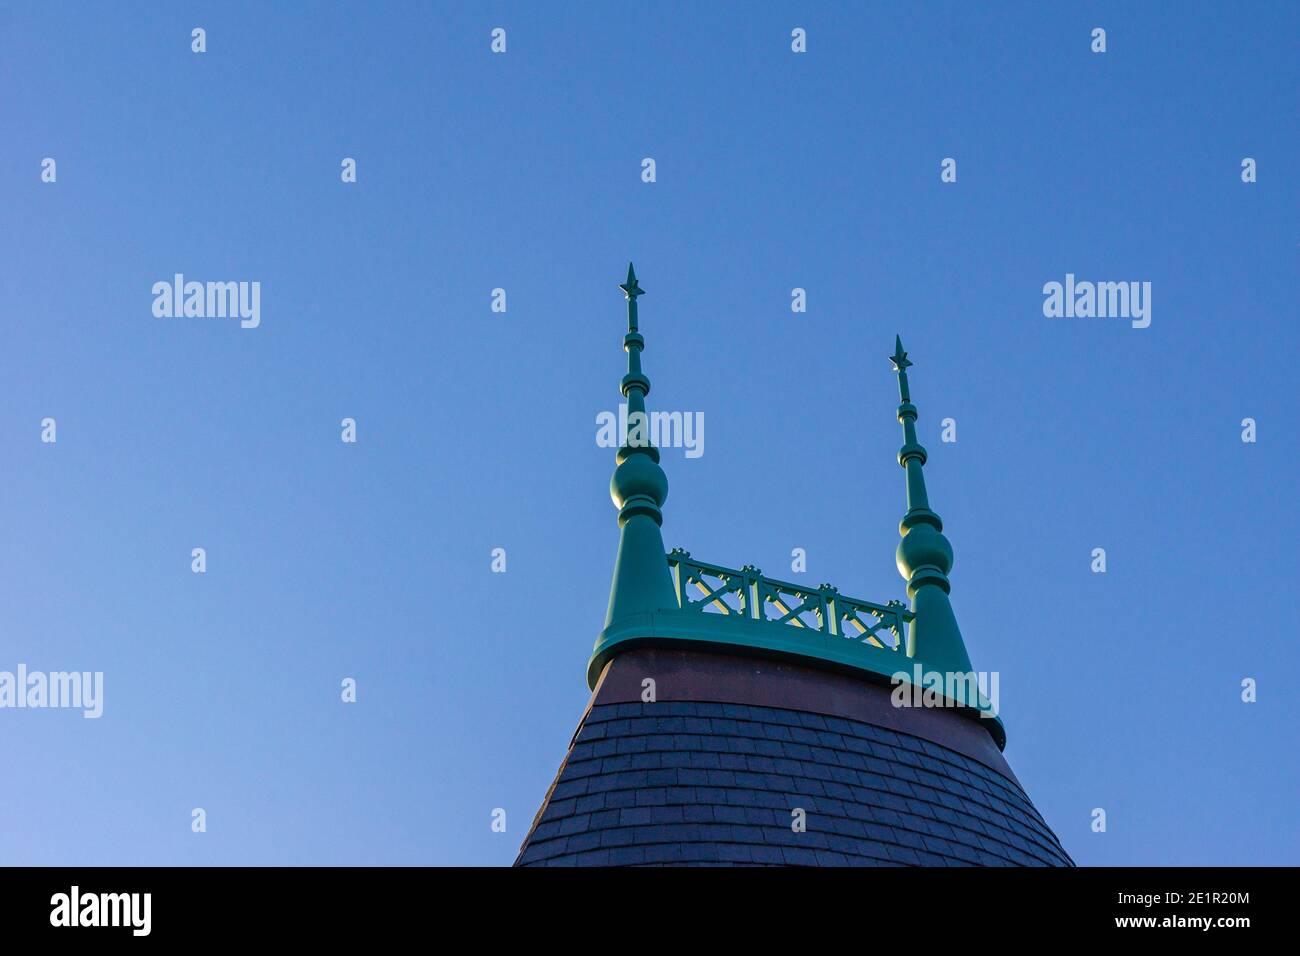 roof top decorated with a lattice ridge with two spiers or lightning rods or finials, selective focus Stock Photo